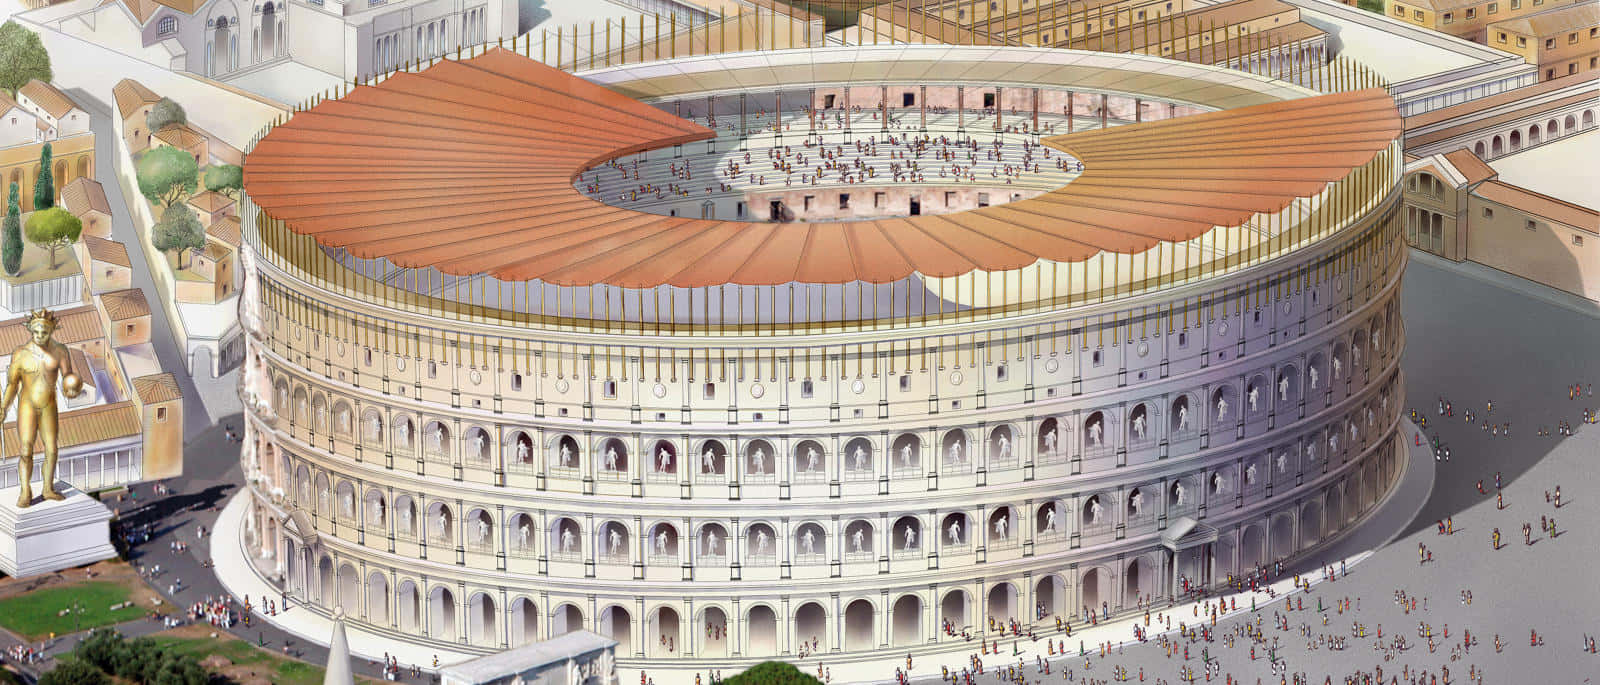 The Spectacular Roman Colosseum